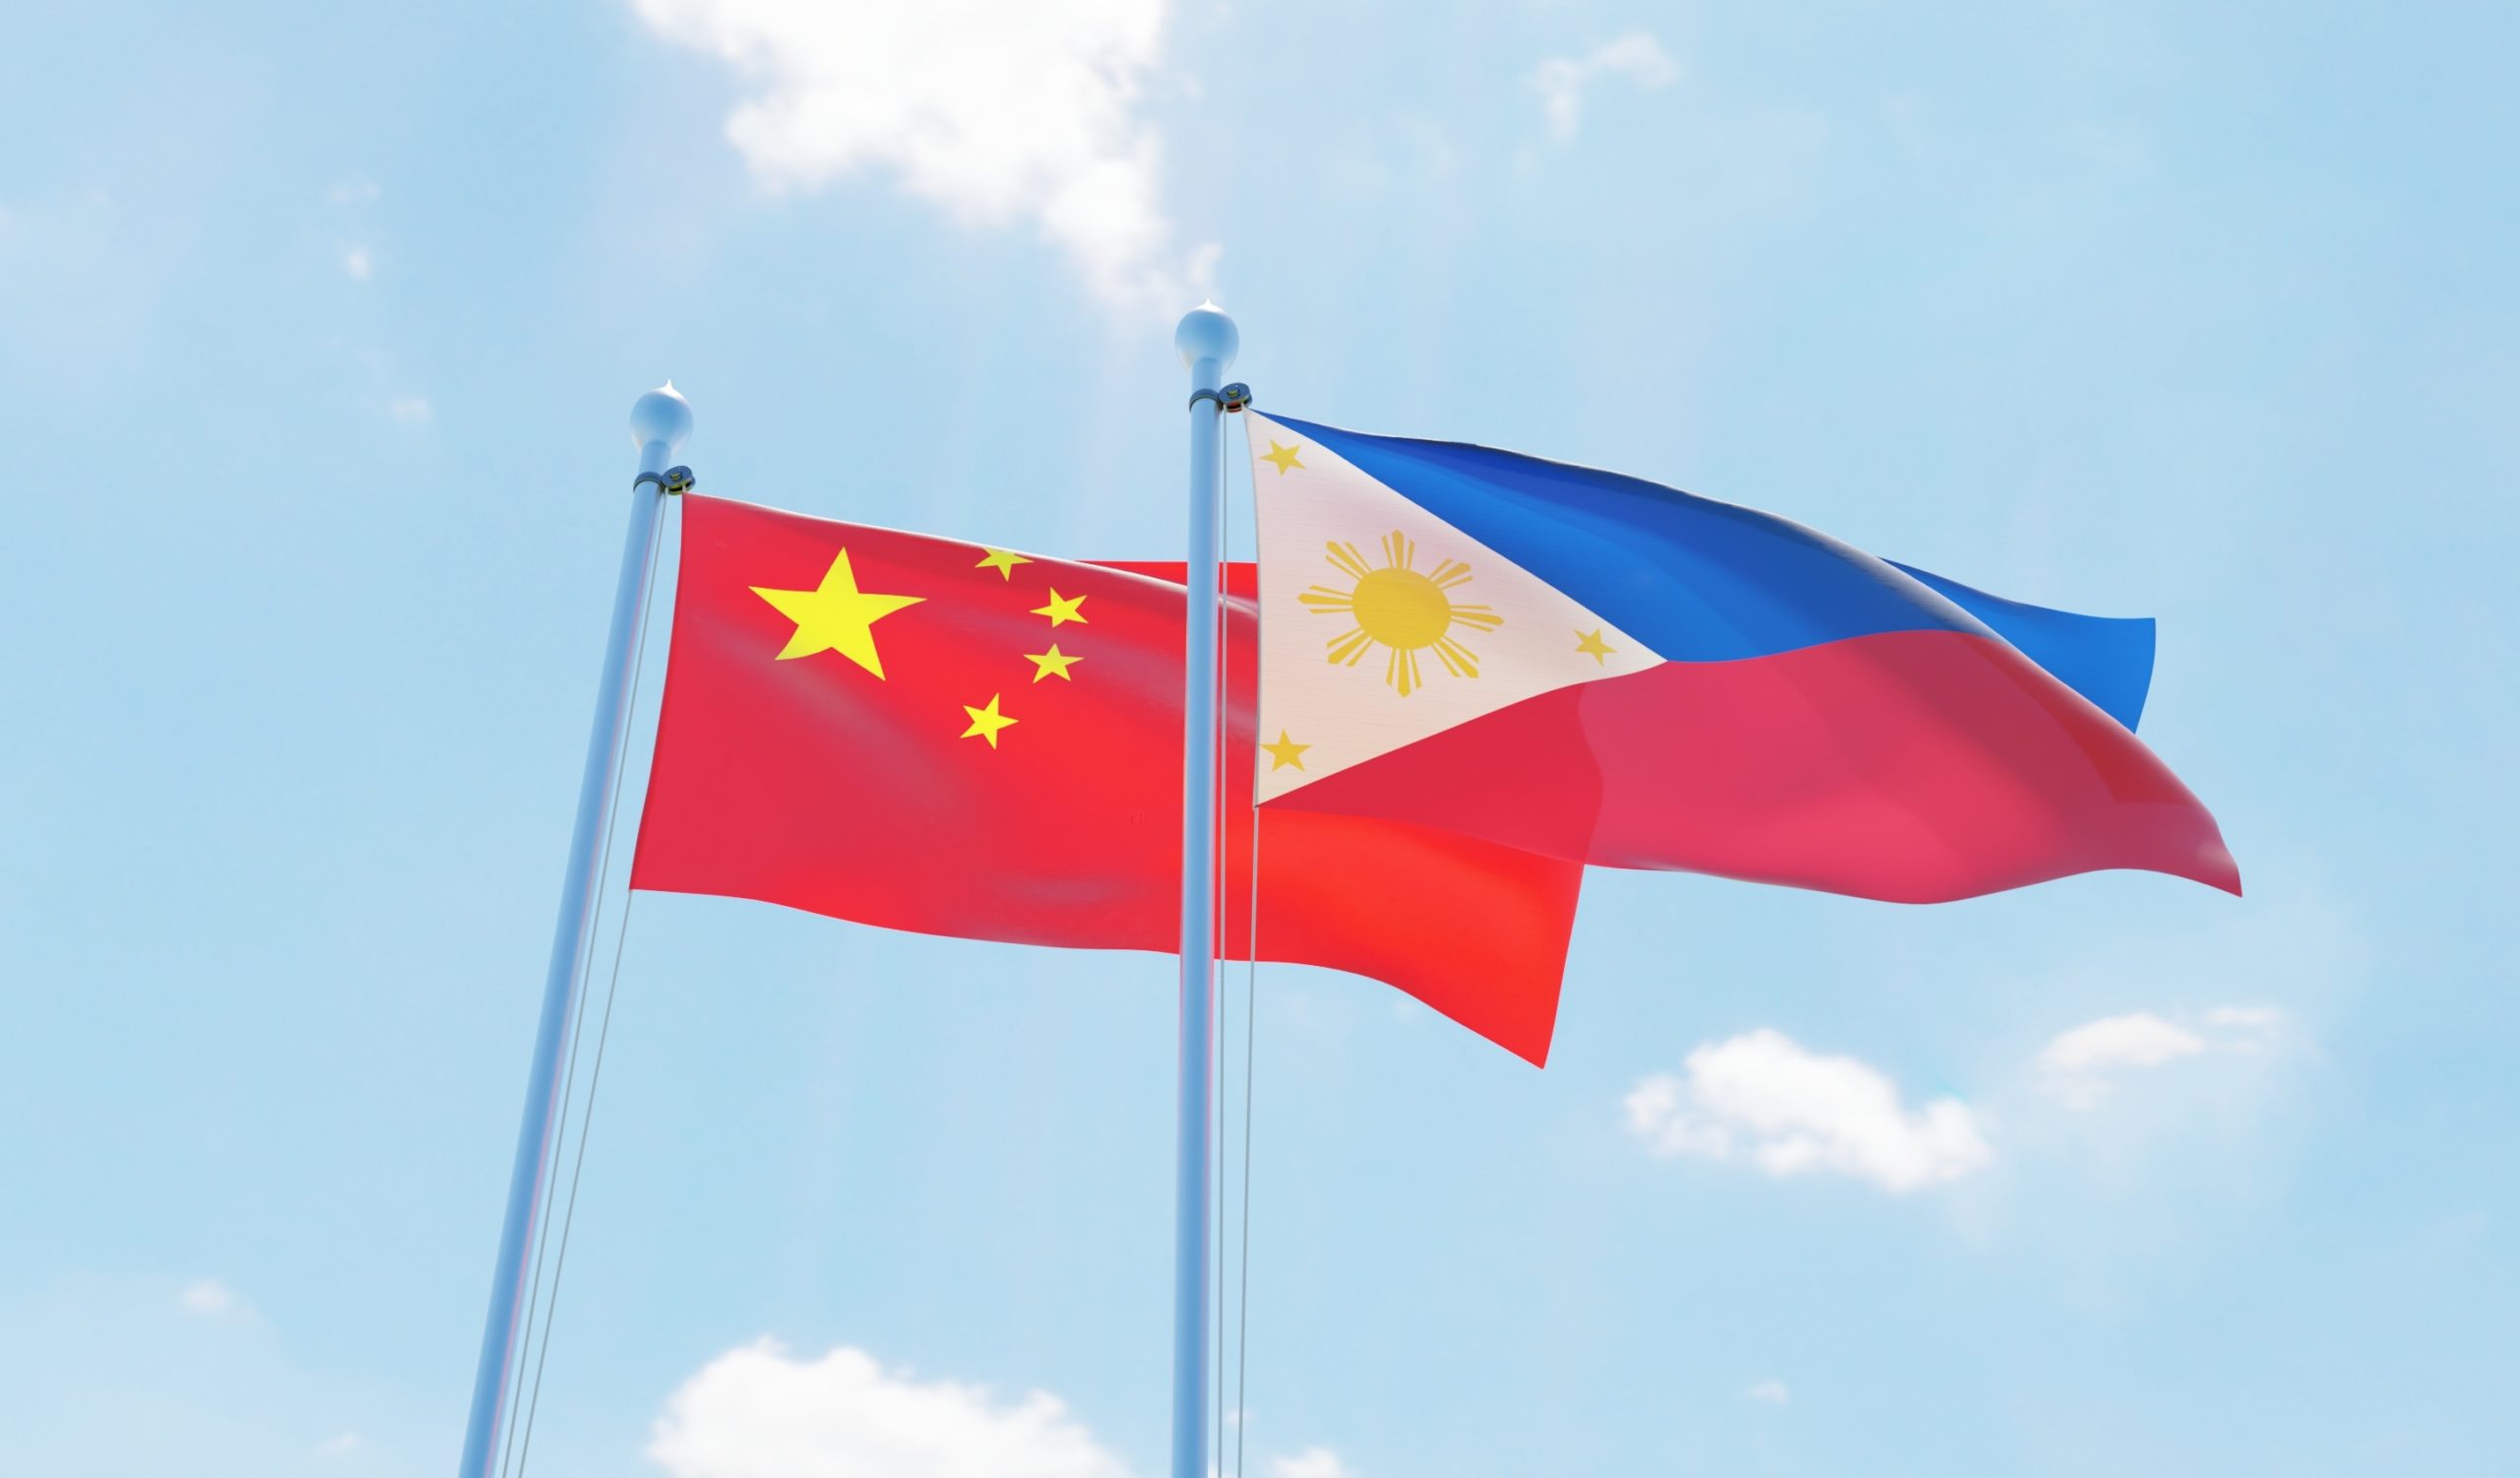 Hot and Cold: The Philippines’ Relations with China (and the United States)